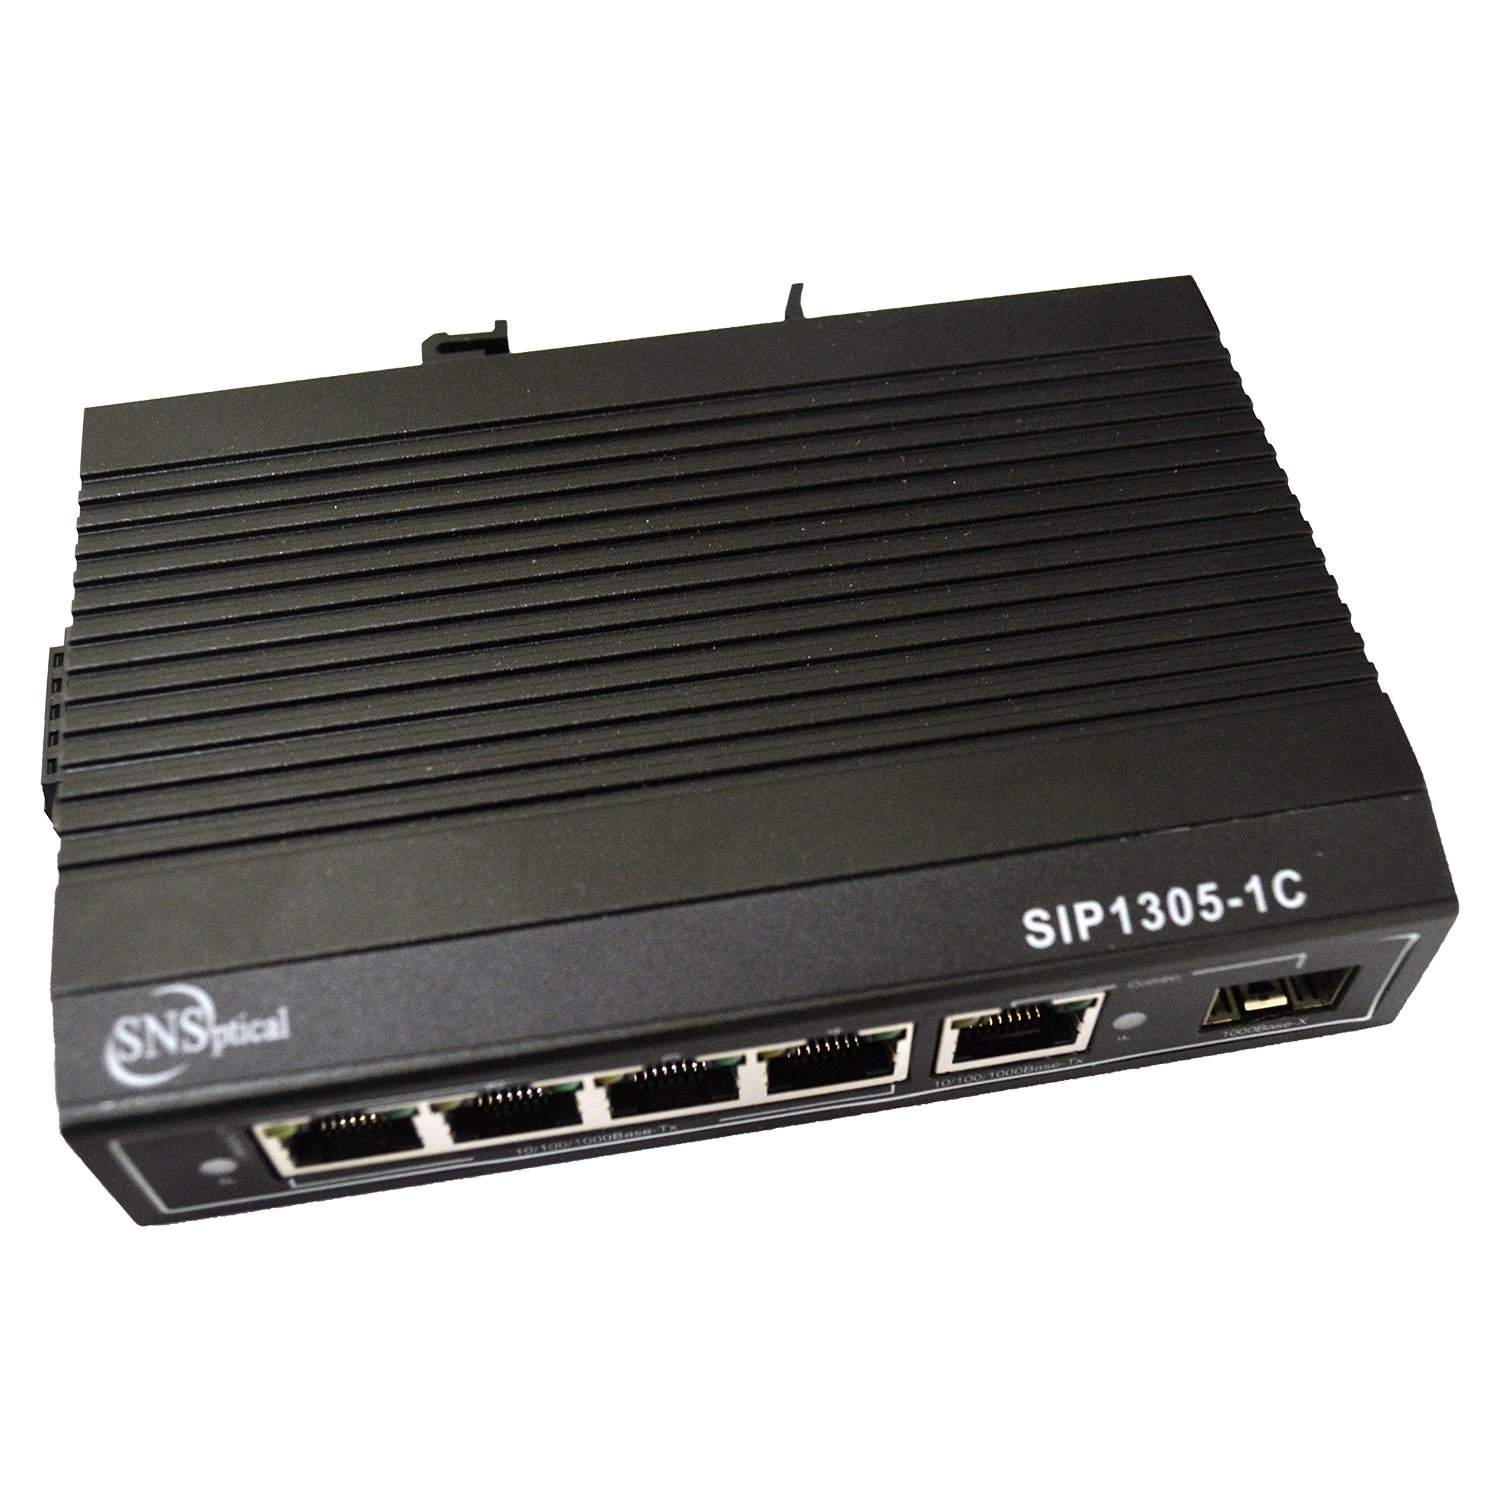 Optical SNS SIP1305-1c L2 5-Ports Industrial POE DIN-Rail Unmanaged Ethernet Switch